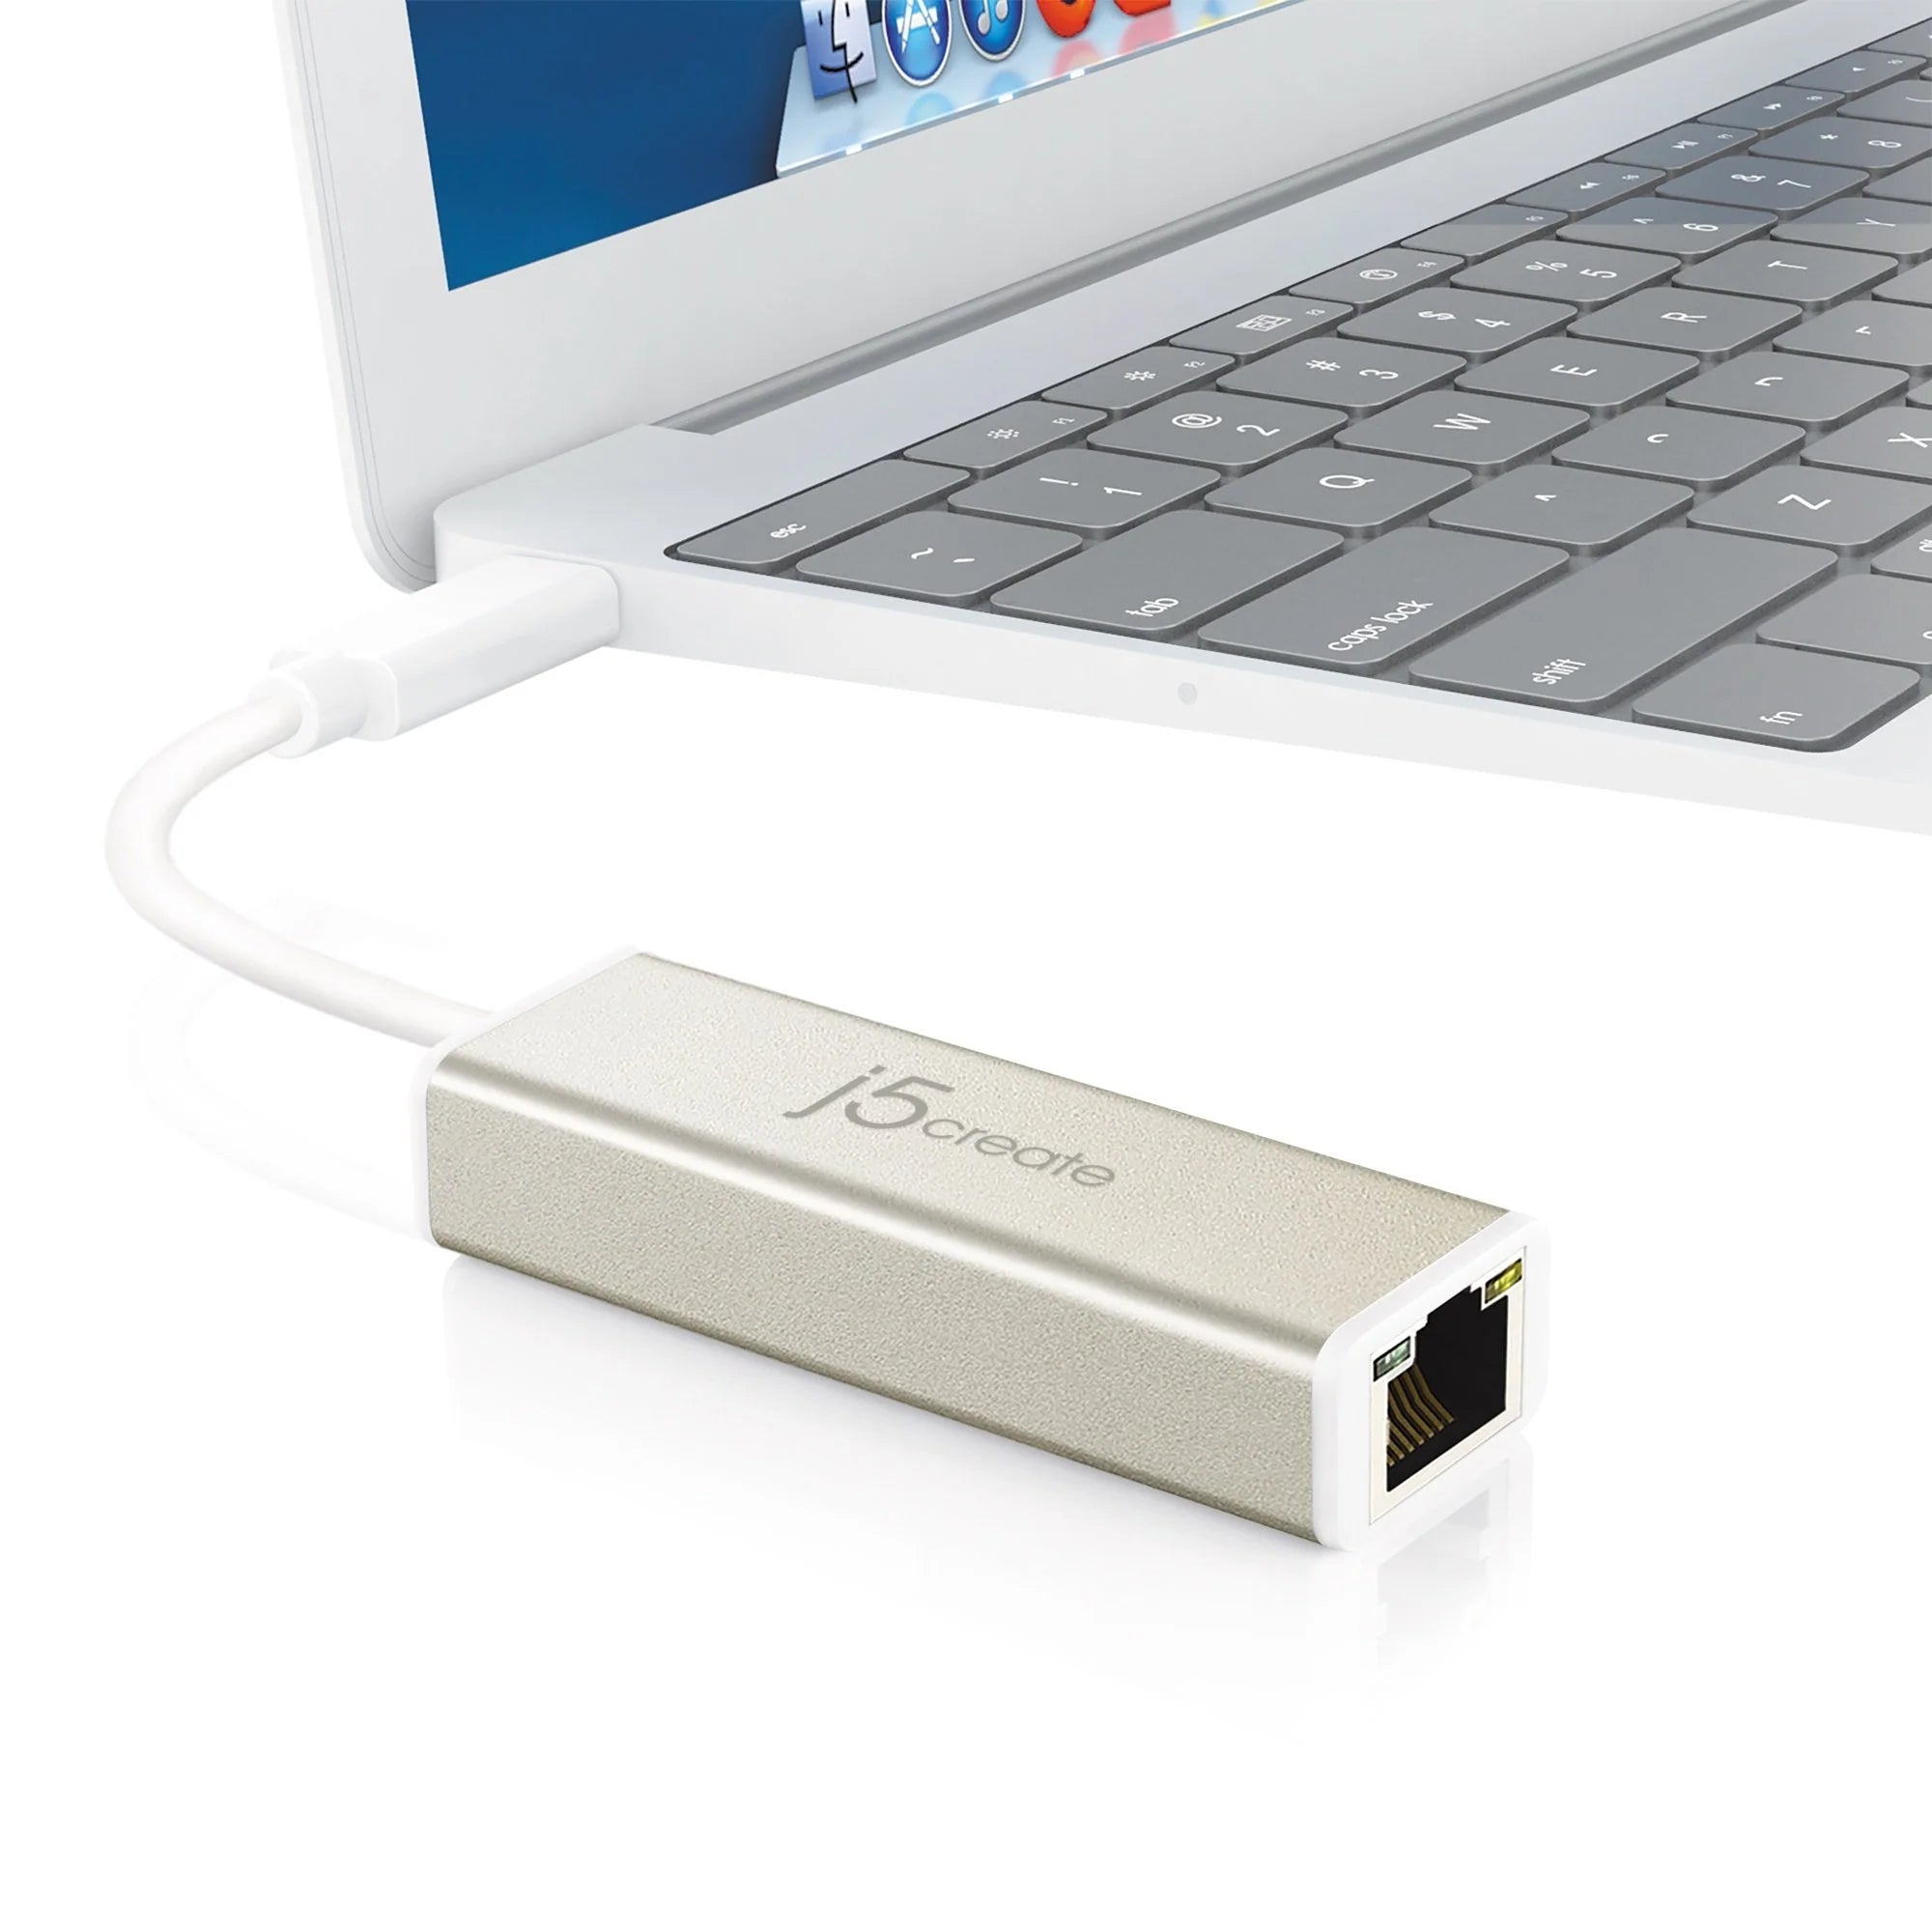 J5create Usb C Gigabit Ethernet Adapter | Color Silver | Best Computer Accessories in Bahrain | Halabh